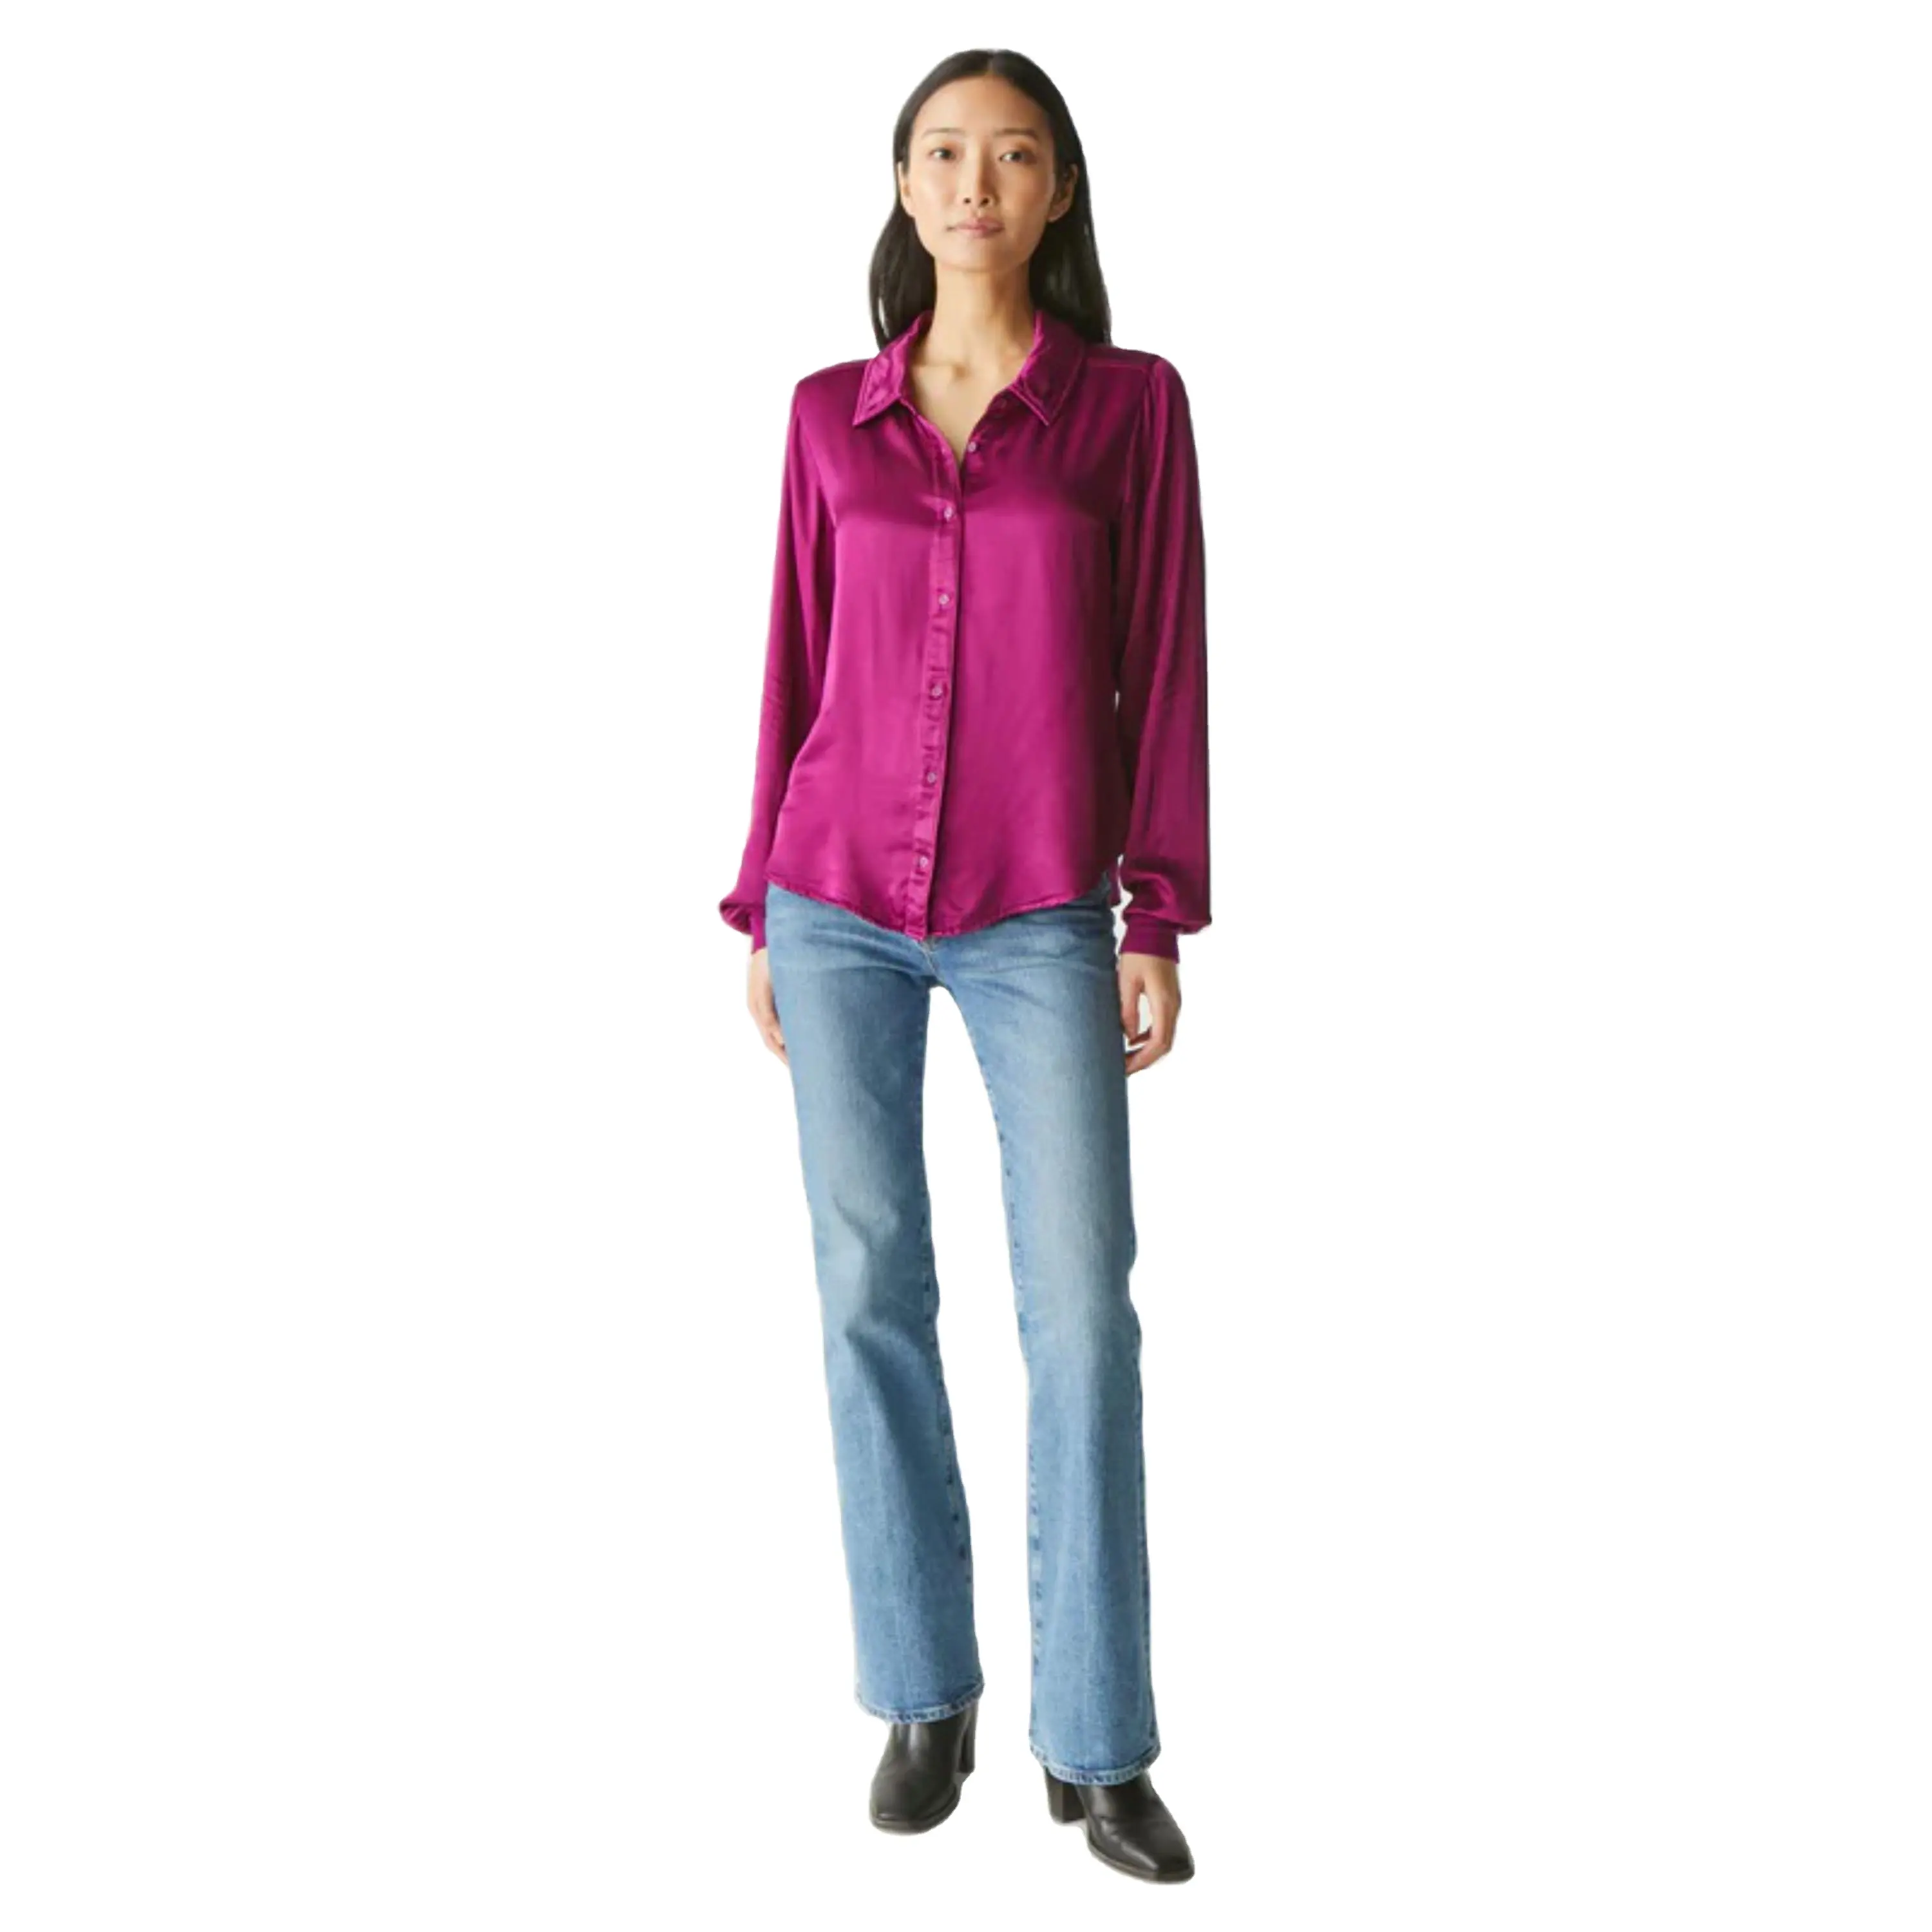 "Stylish Women's Satin Blouse - Smooth and Silky Texture, Ideal for Professional and Casual Wear, Comes in a Variety of Shades